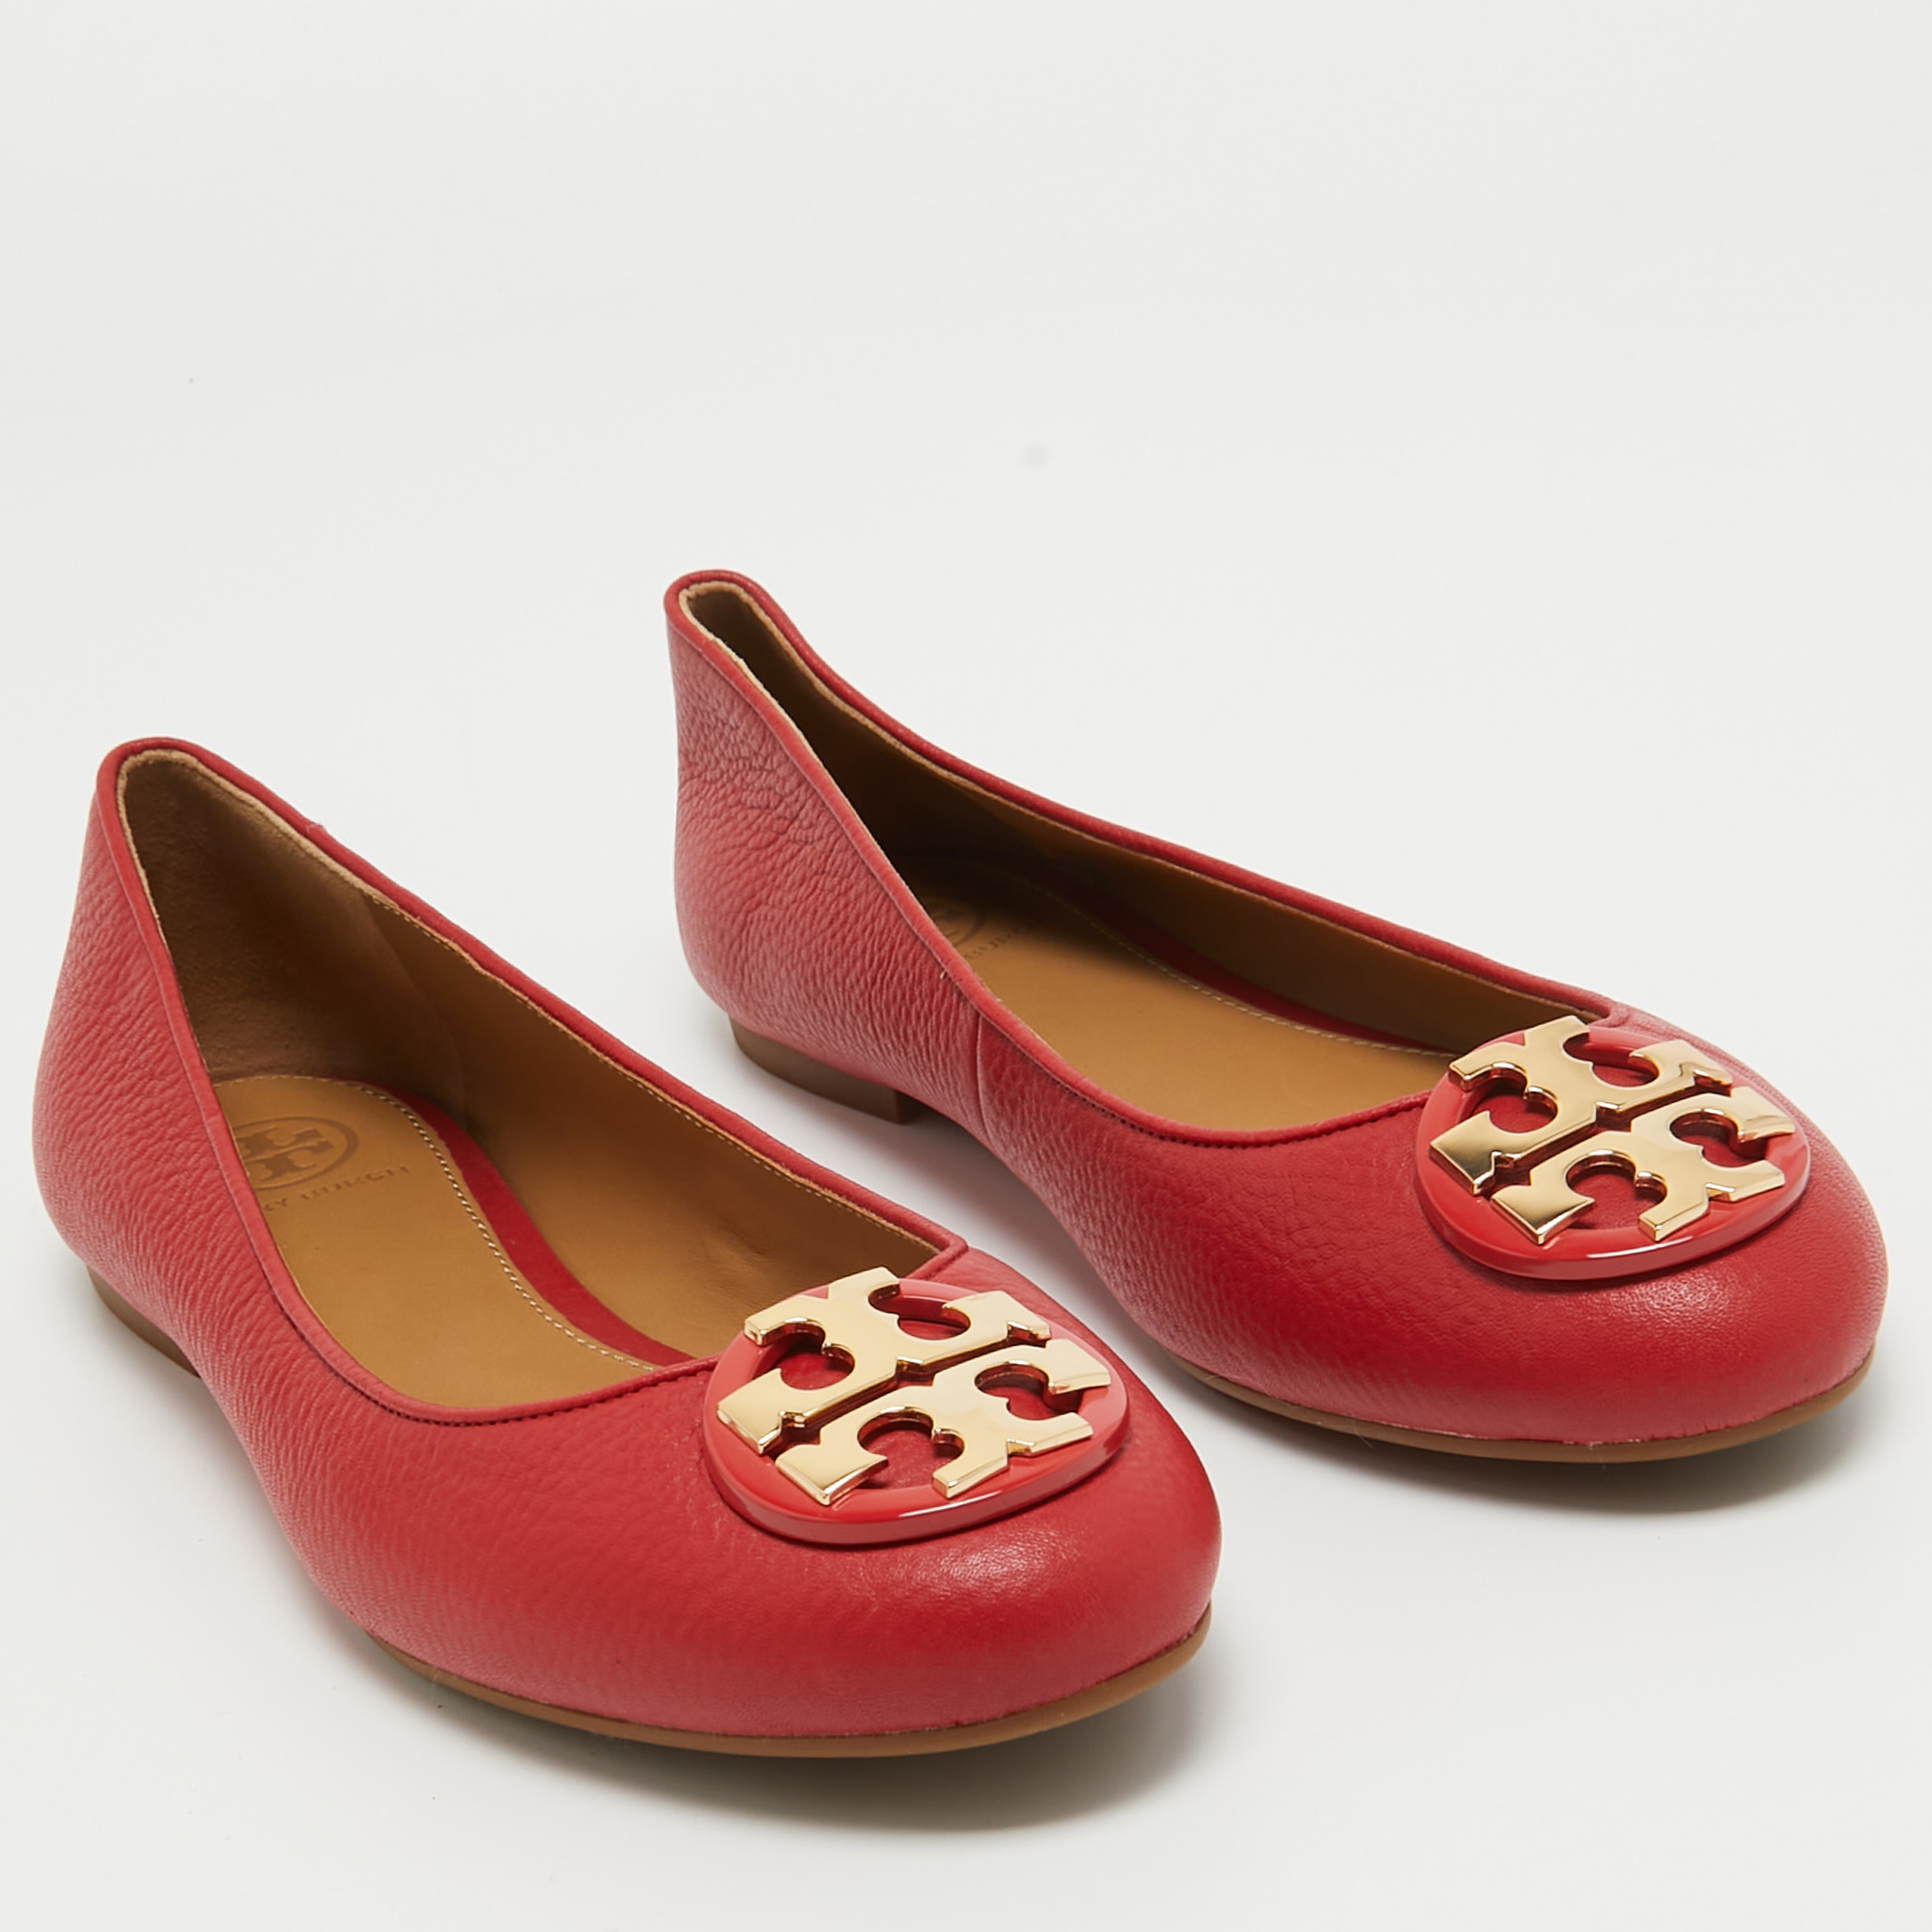 Tory Burch Red Leather Reva Ballet Flats Size 37.5